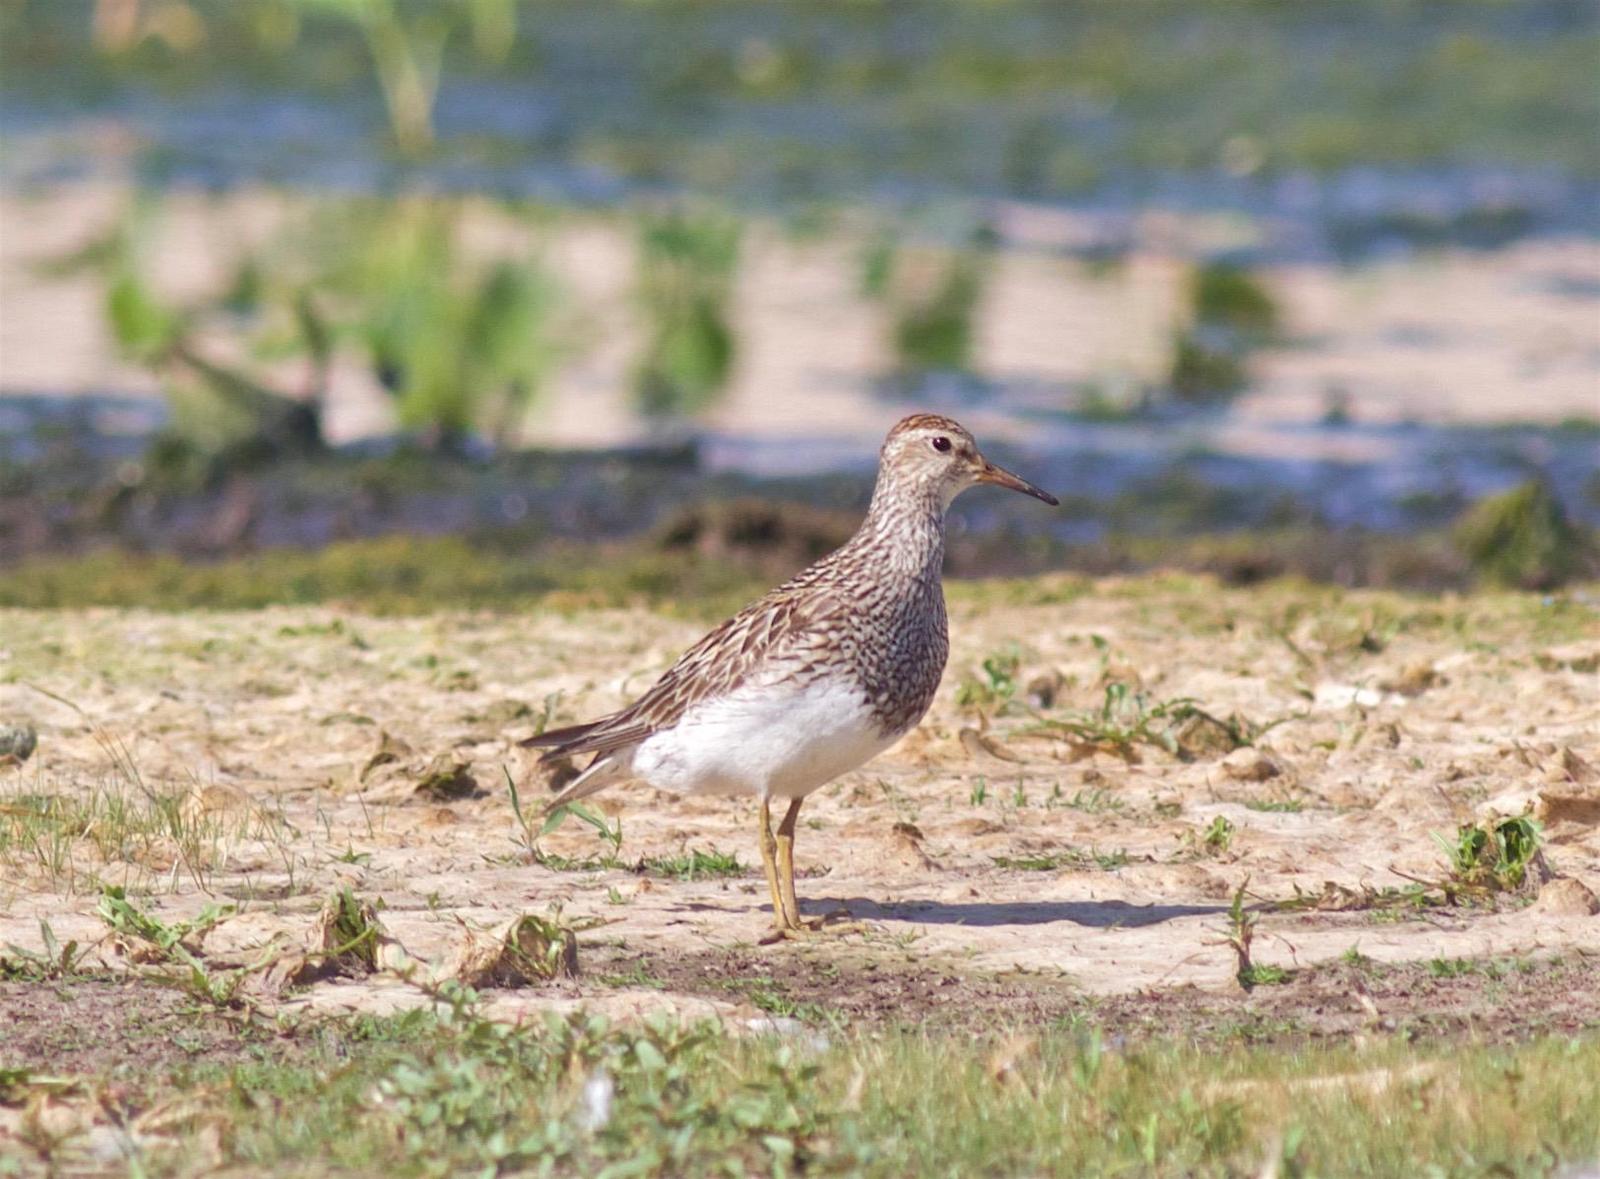 Pectoral Sandpiper Photo by Kathryn Keith